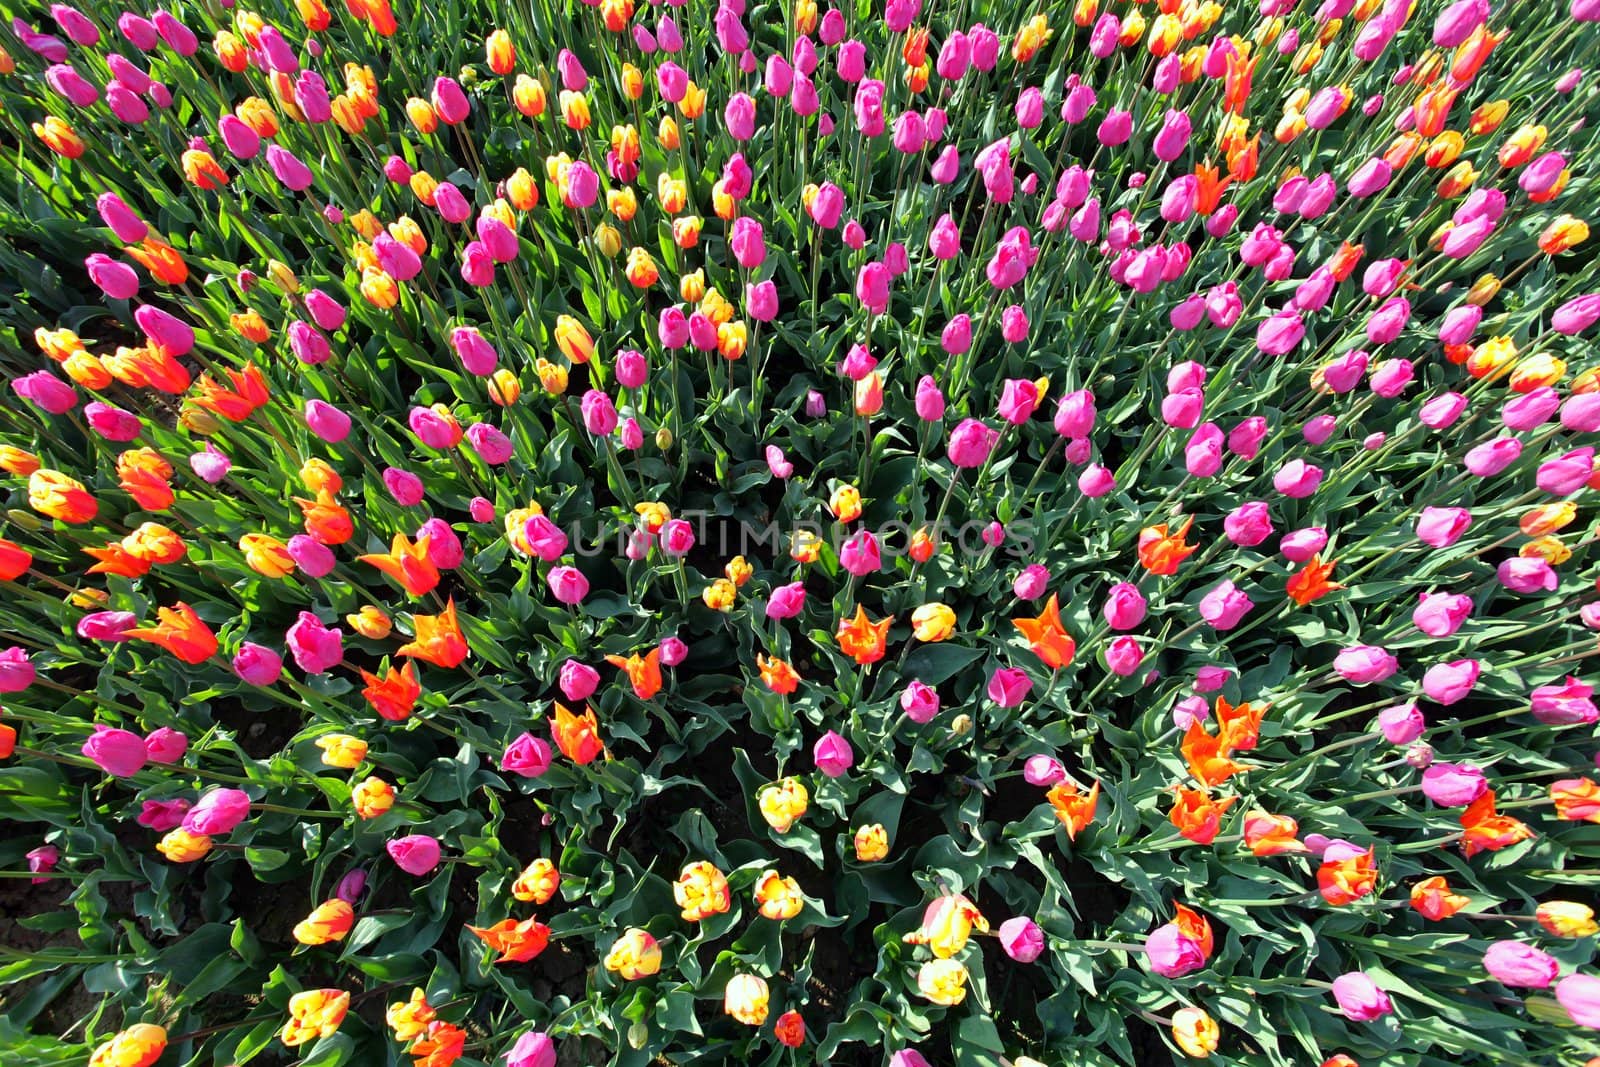 View of many colorful tulips from above